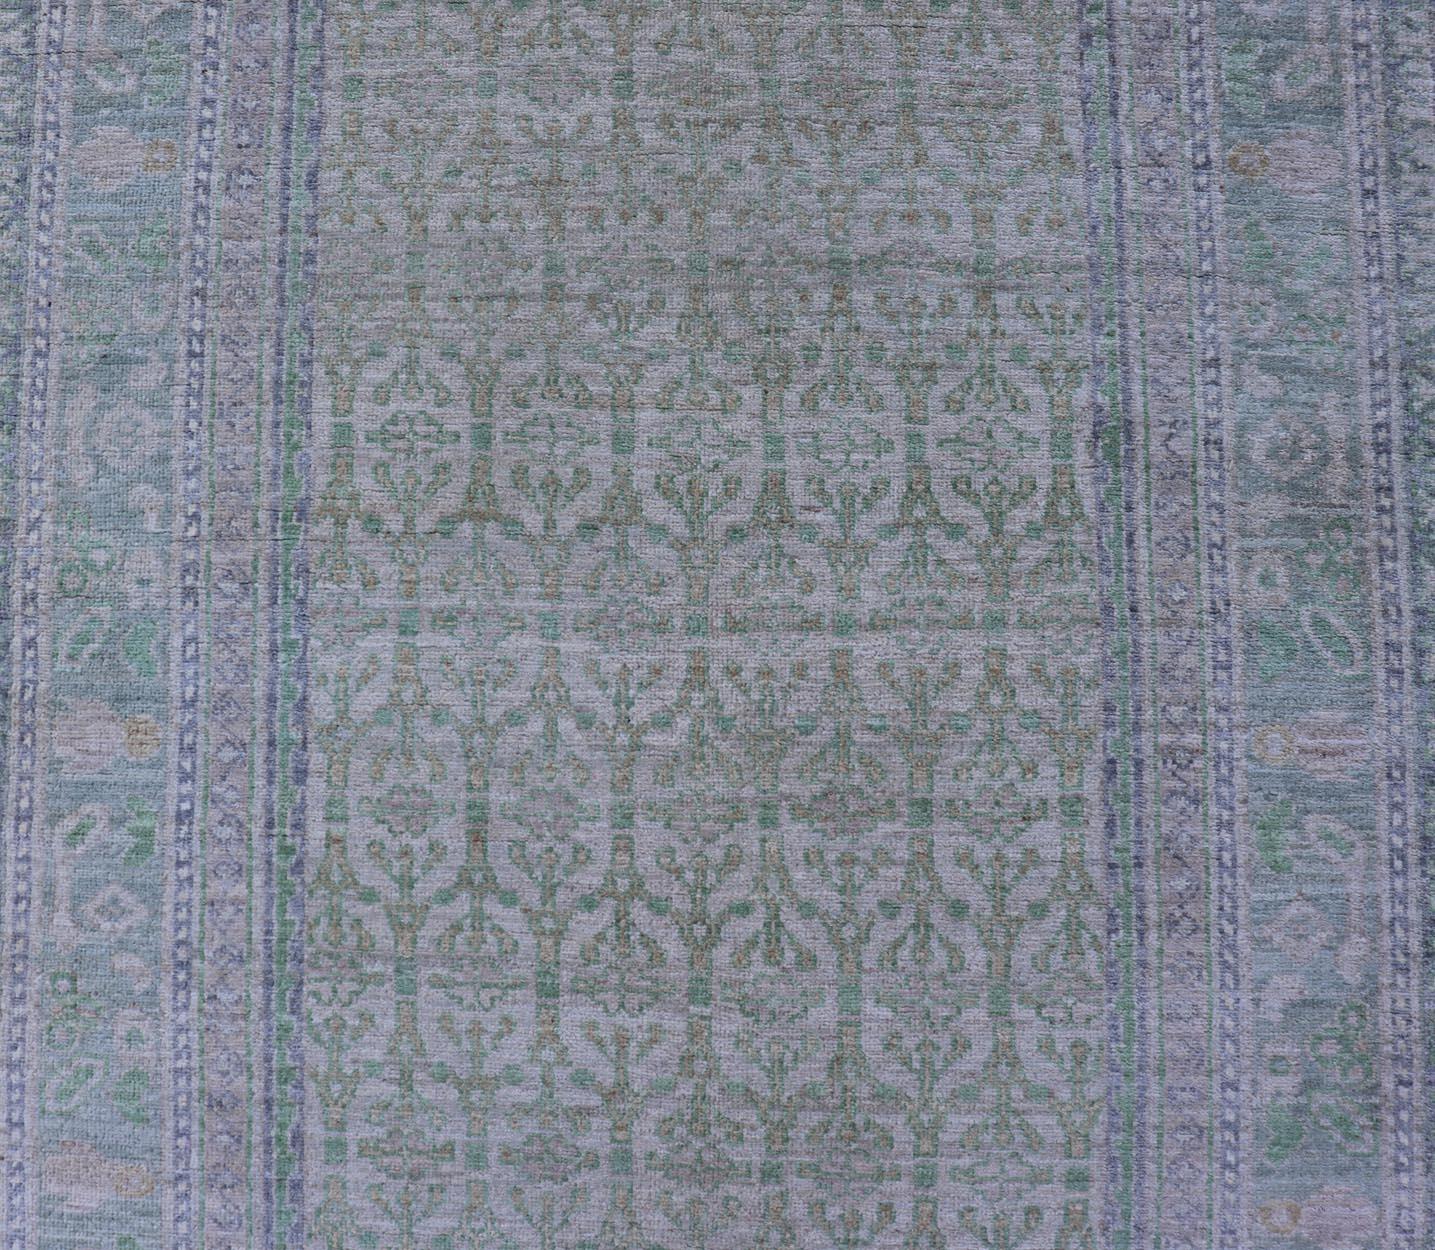 Tabriz Sub-Geometric Paisley Designed Rug with Muted Tones of Yellow-Green and Brown For Sale